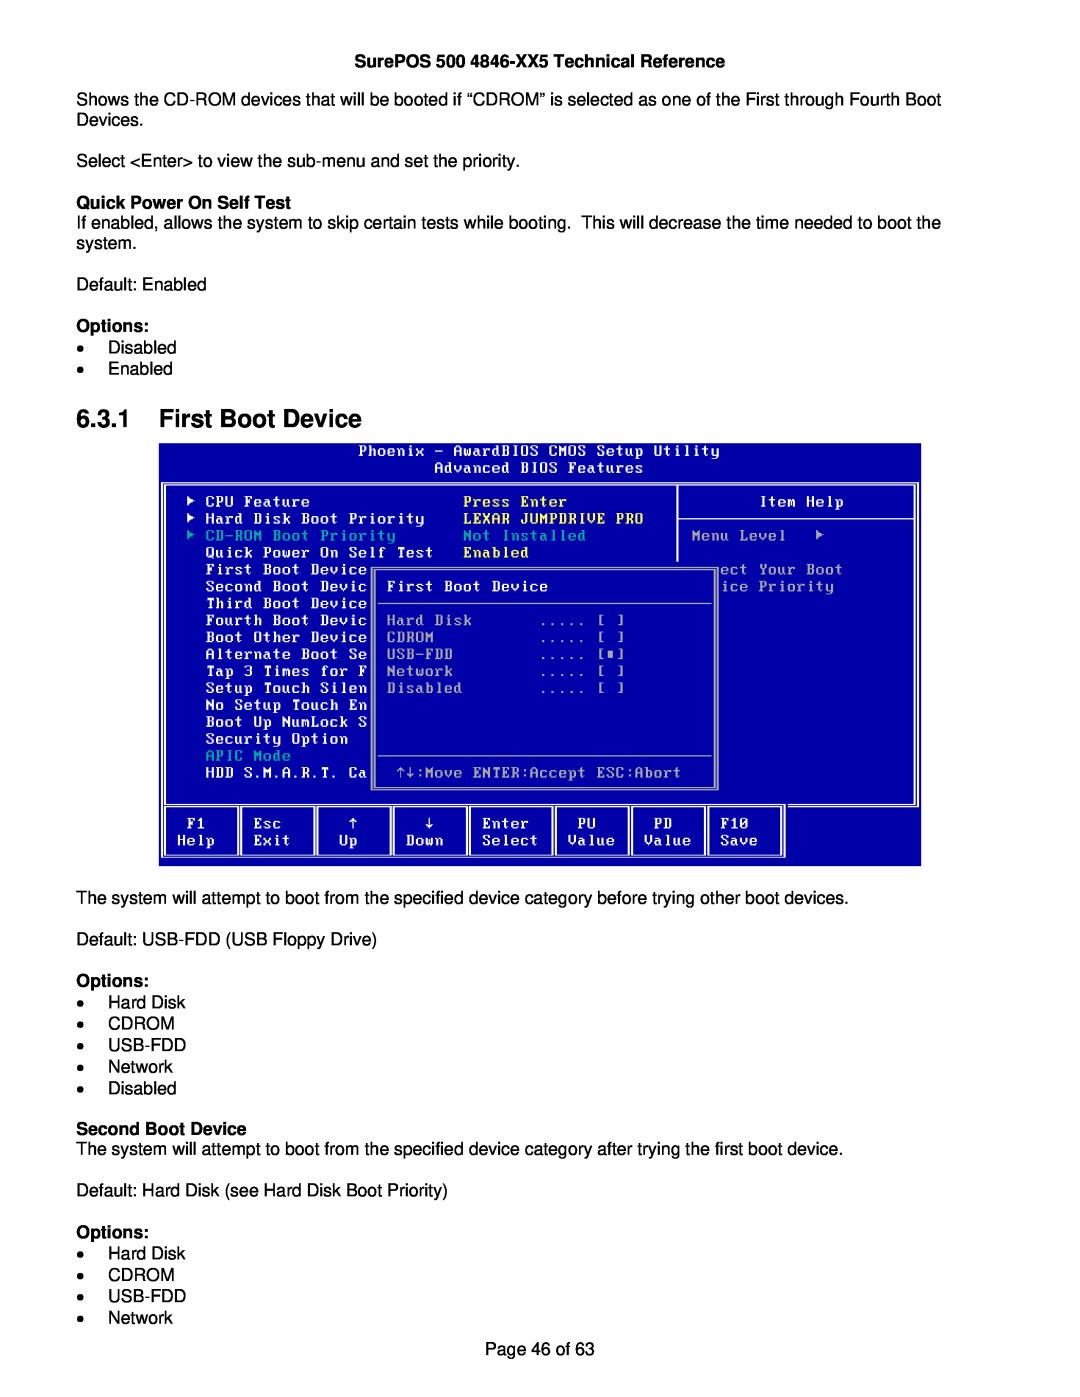 IBM First Boot Device, SurePOS 500 4846-XX5 Technical Reference, Quick Power On Self Test, Options, Second Boot Device 